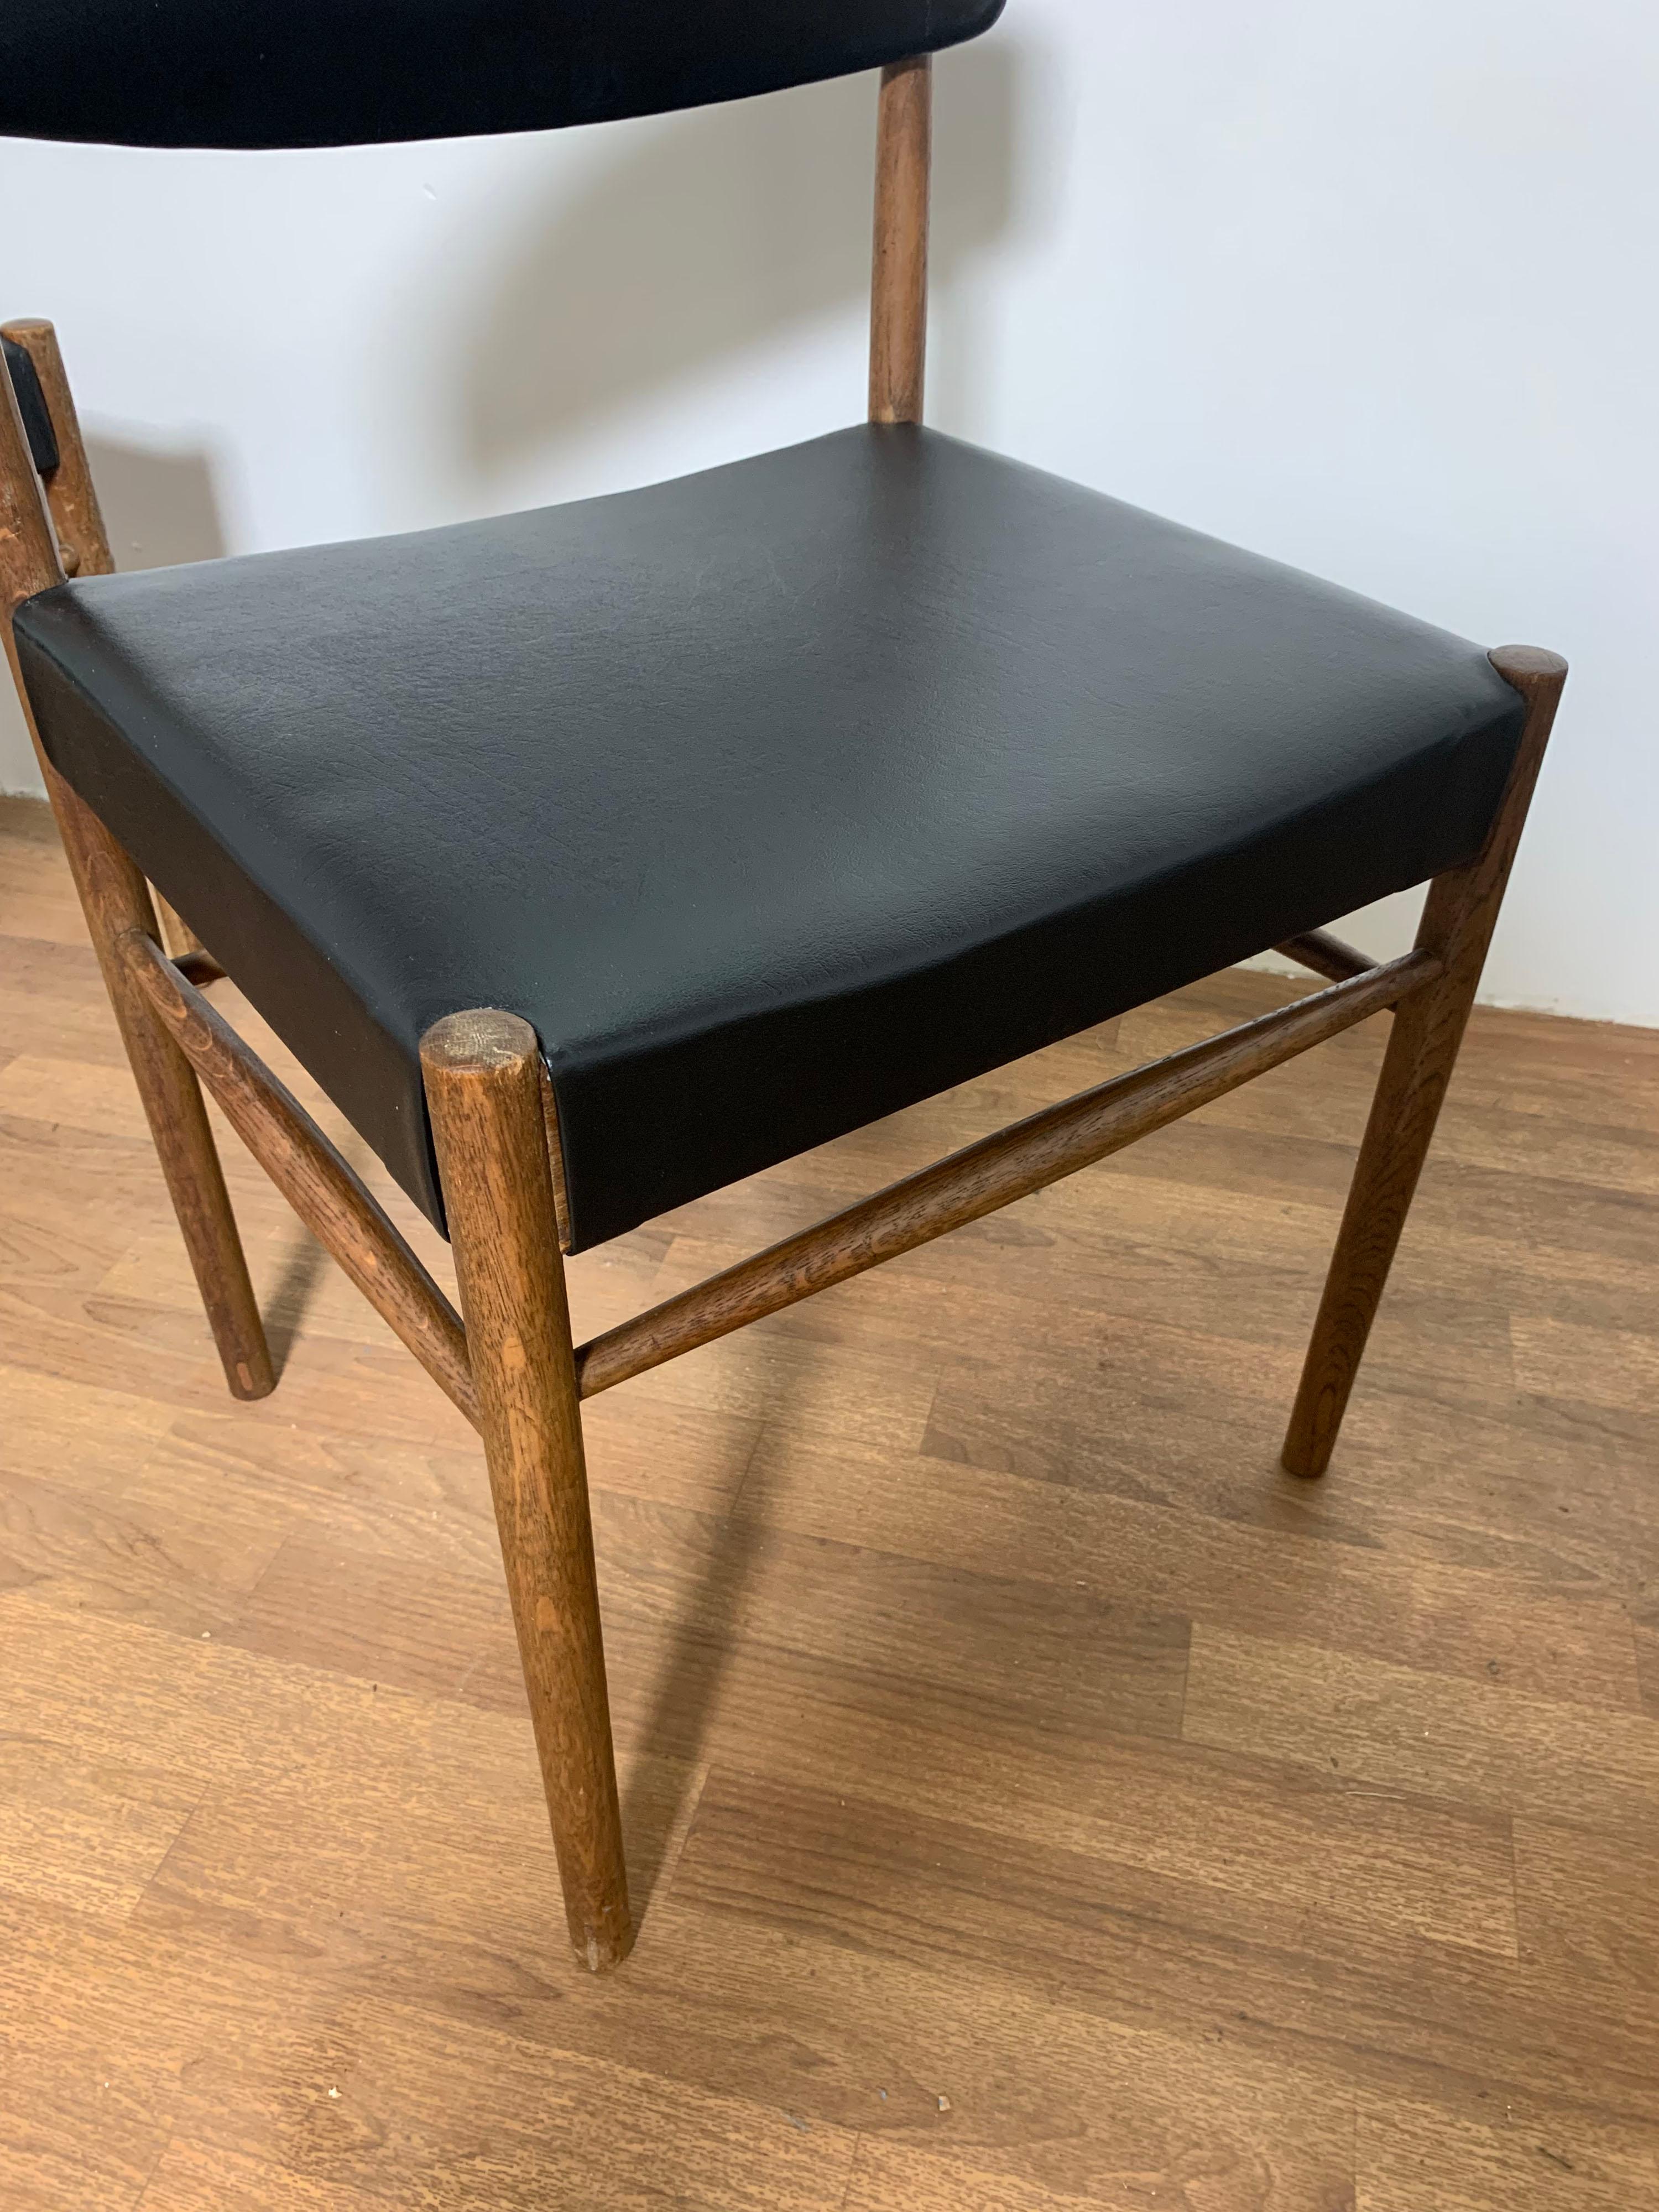 Set of Six Danish Dining Chairs in Oak, circa 1960s For Sale 4